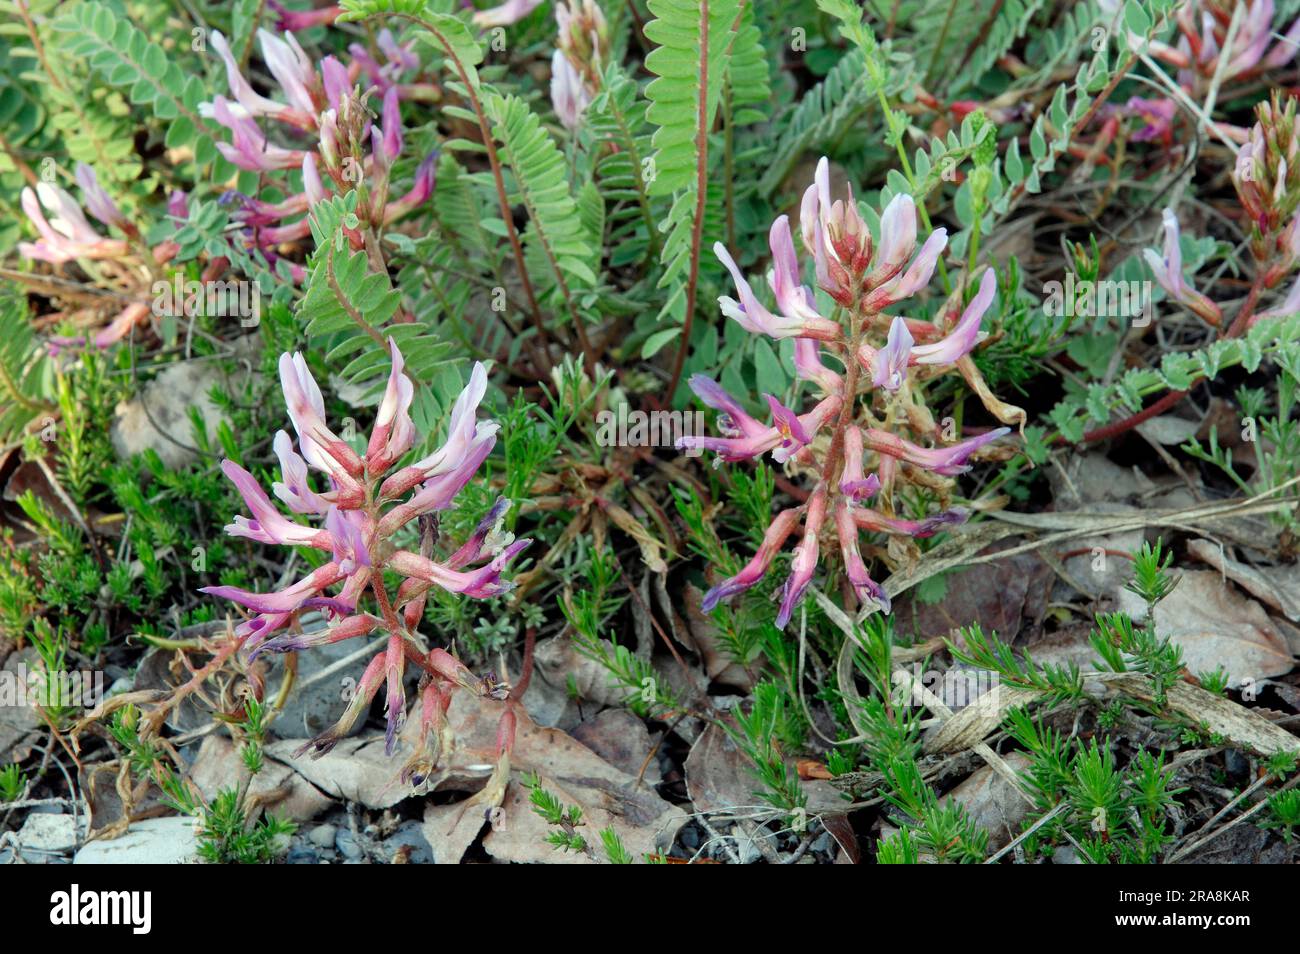 Montpellier milkvetch (Astragalus monspessulanus), Provence, Southern France, Montpellier tragacanth Stock Photo